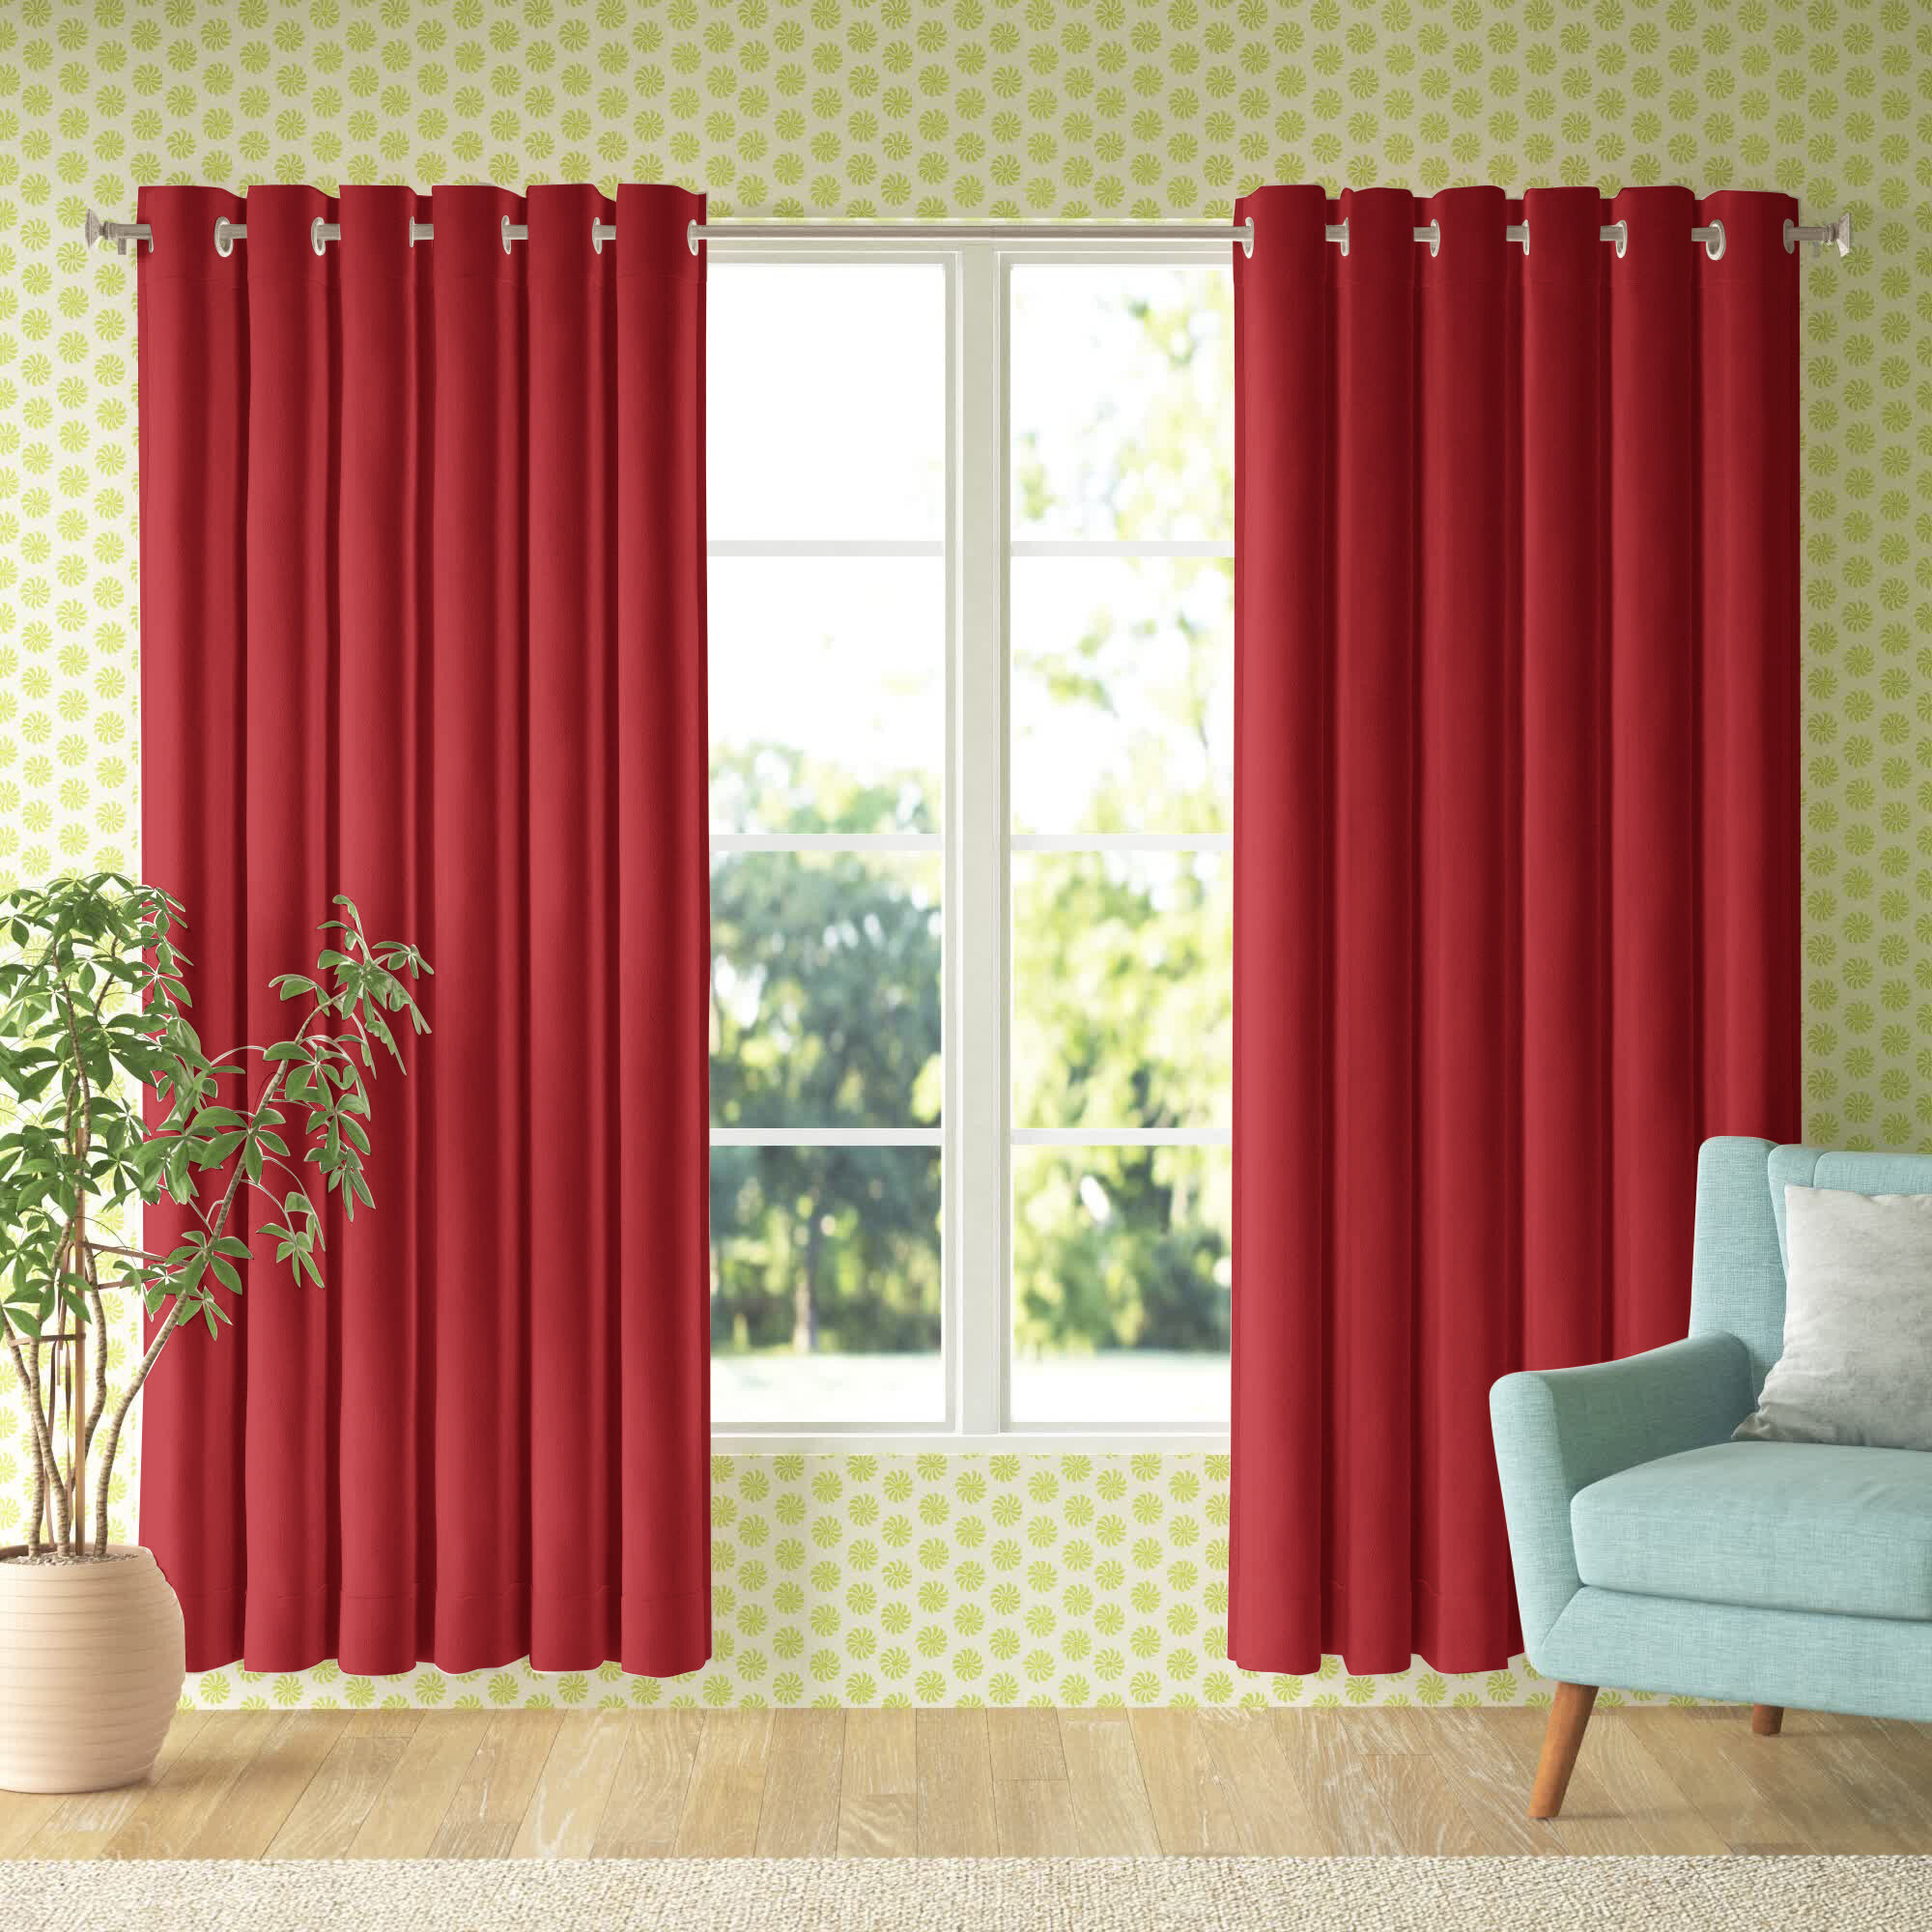 Eyelet Lined Curtains Skye Red & Ivory choice of sizes